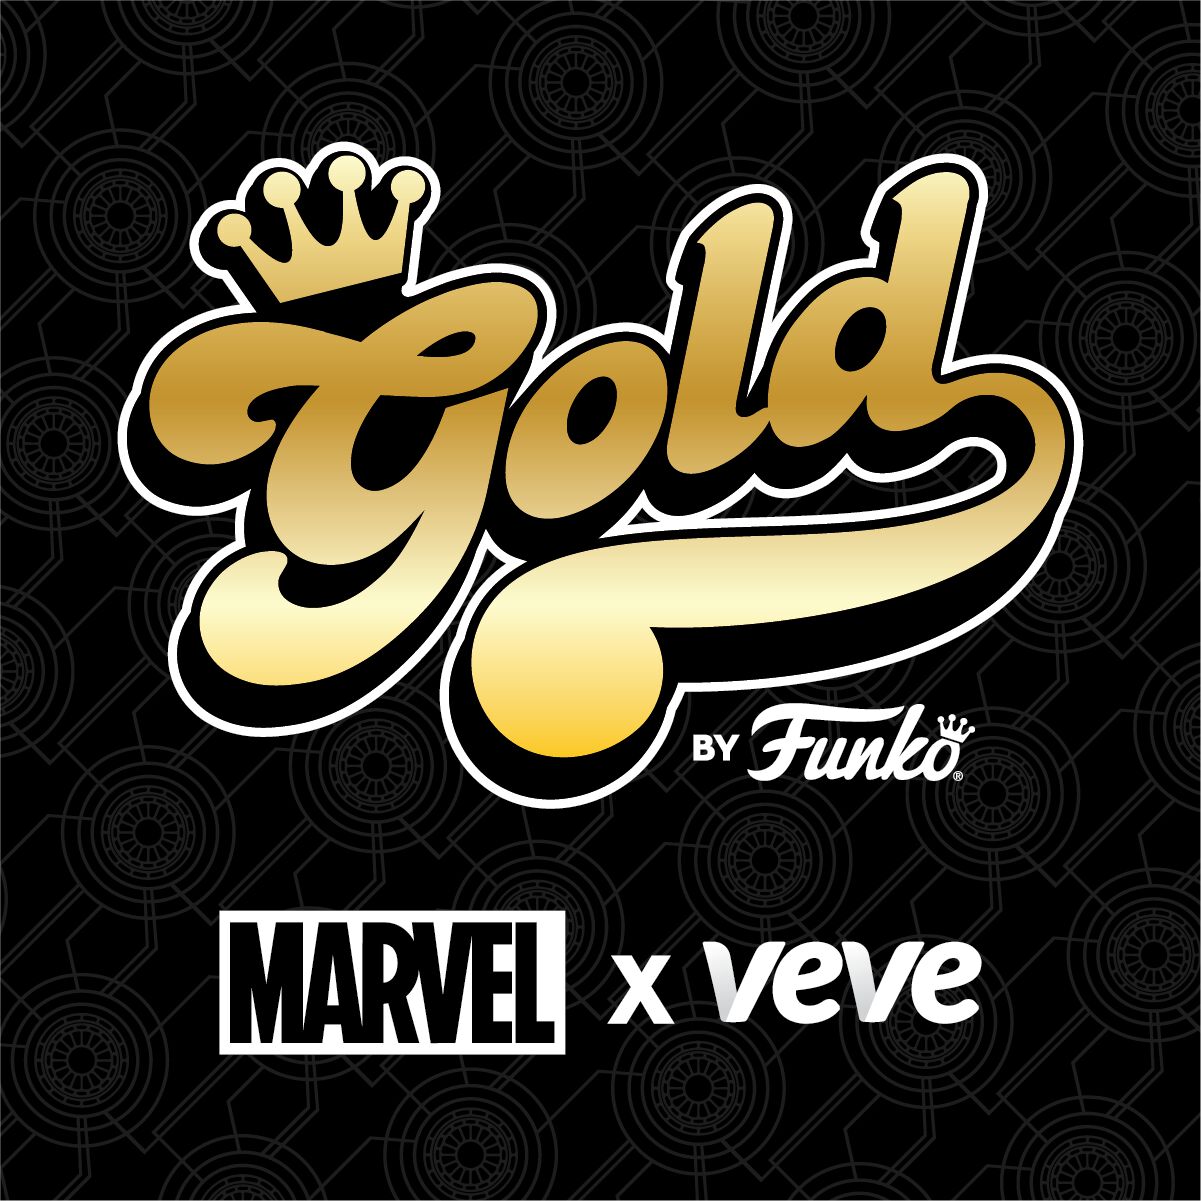 Funko x Marvel x VeVe Brings GOLD Iron Man Collectible with NFT